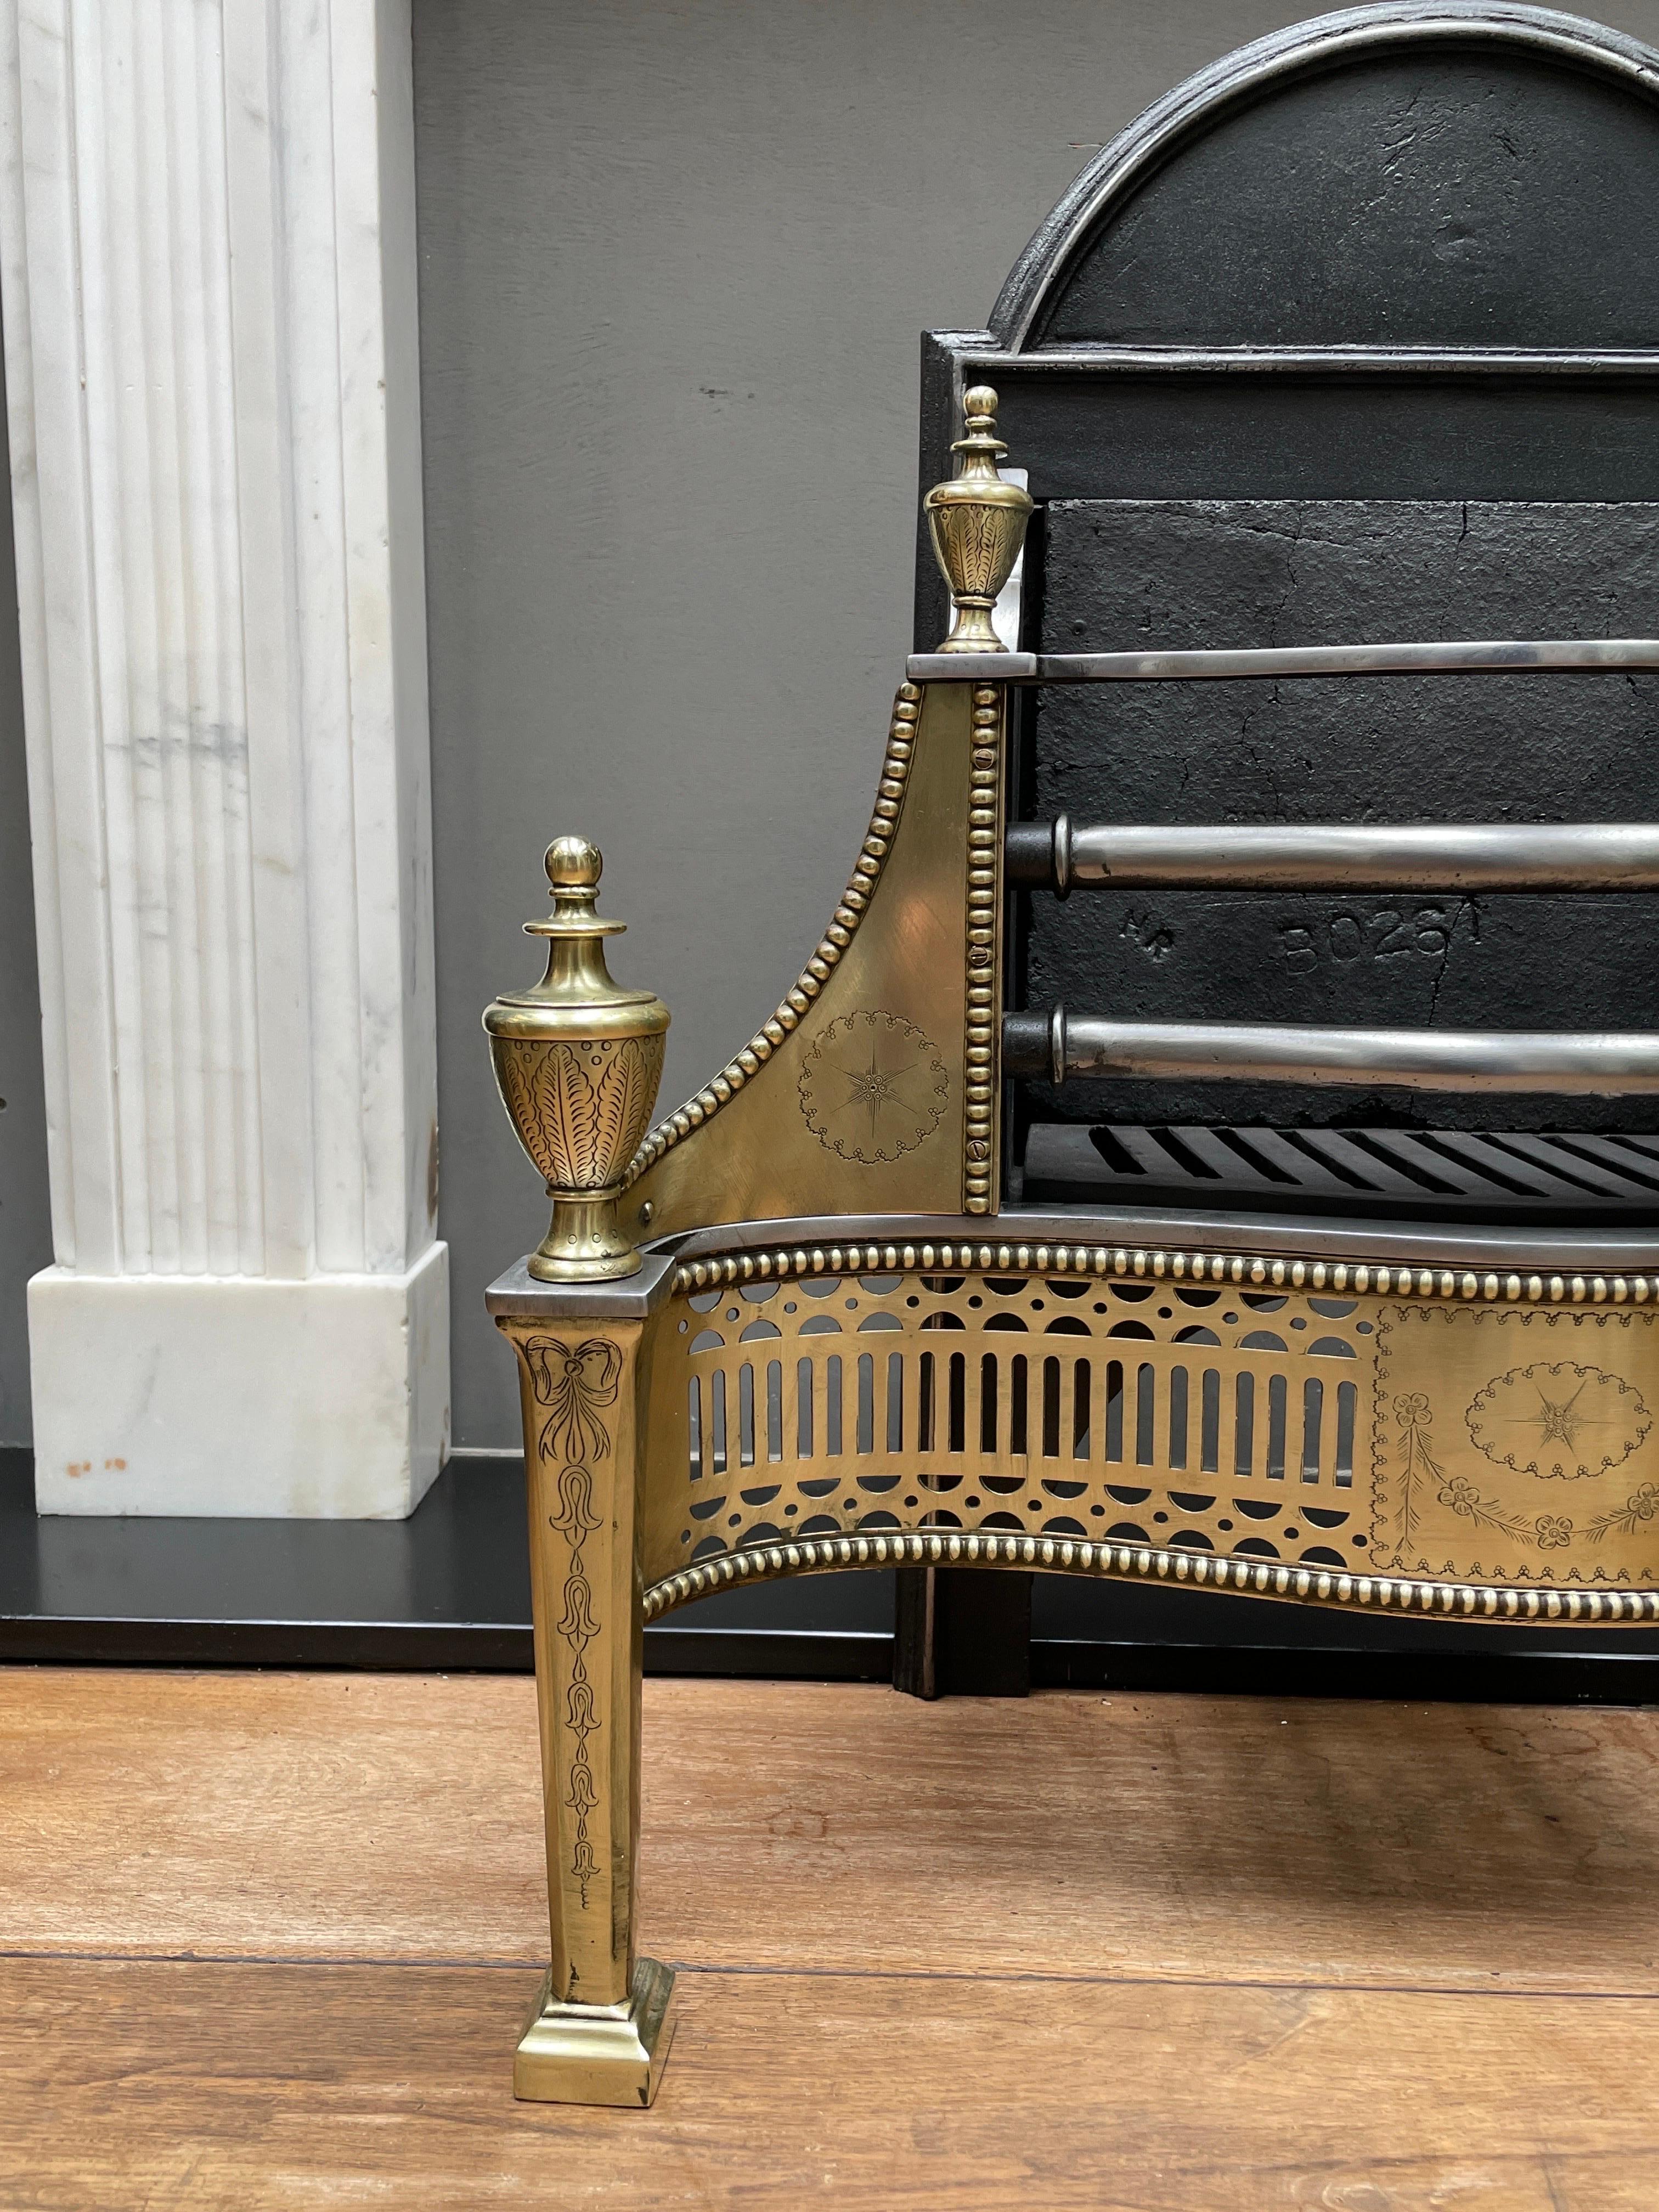 An engraved brass and steel Georgian style fire grate from the Mid-20th Century by blacksmiths Jordan and sons. The engraved front legs flanking a serpentine intricately pierced and cut fret with beaded edge. The conforming wings engraved and beaded